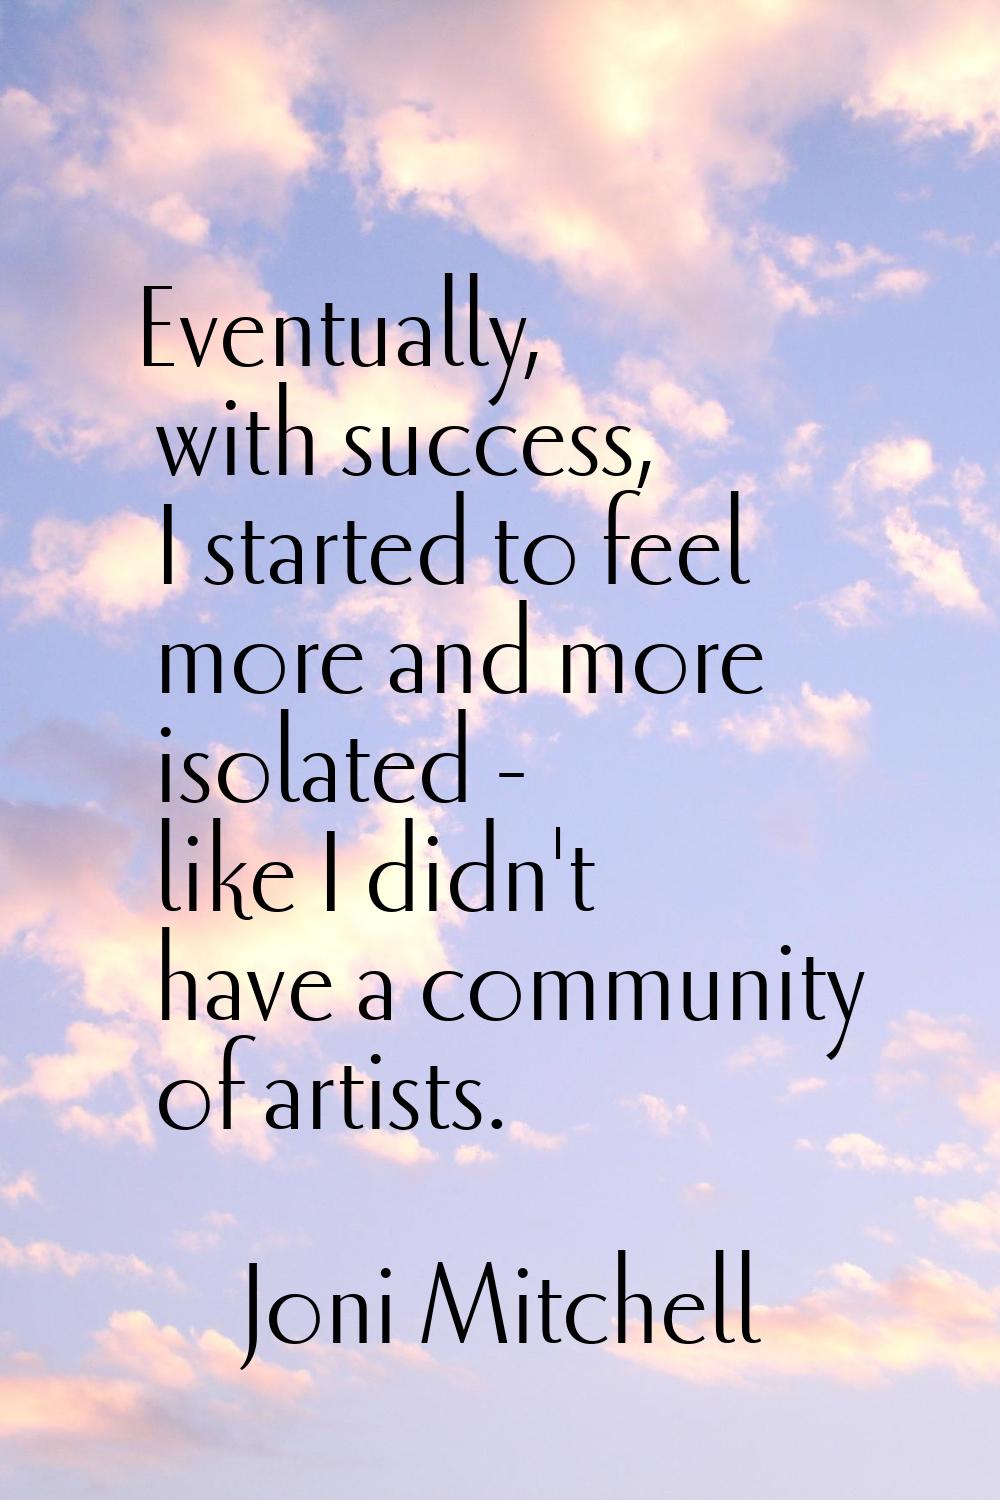 Eventually, with success, I started to feel more and more isolated - like I didn't have a community